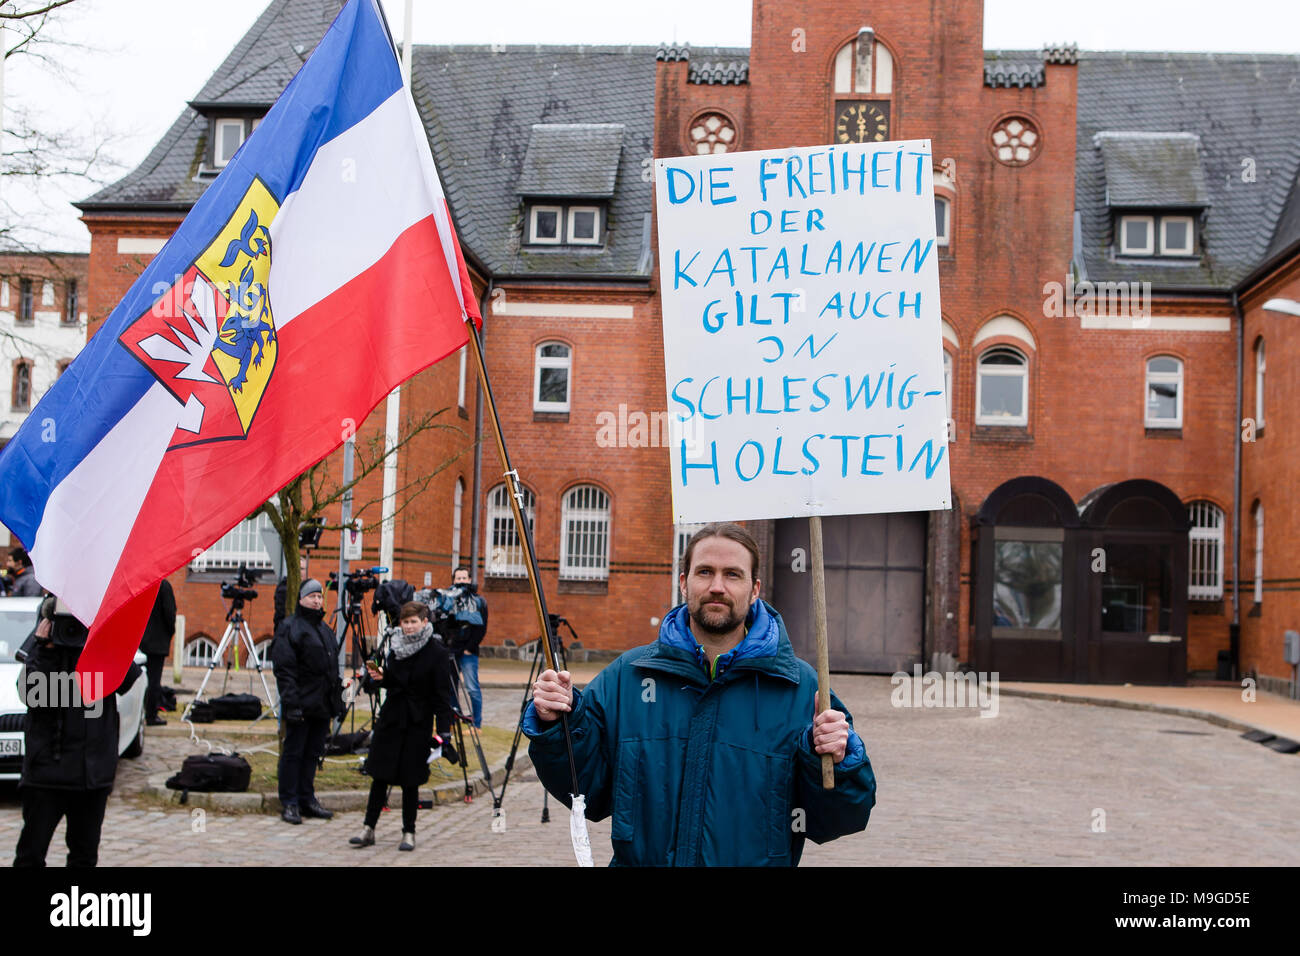 26 March 2018, Germany, Neumuenster: A demonstrator standing in front of the correctional facility where the former catalonian Regional President Puigdemont was brought after his arrest on Sunday (25 March). Photo: Frank Molter/dpa Stock Photo